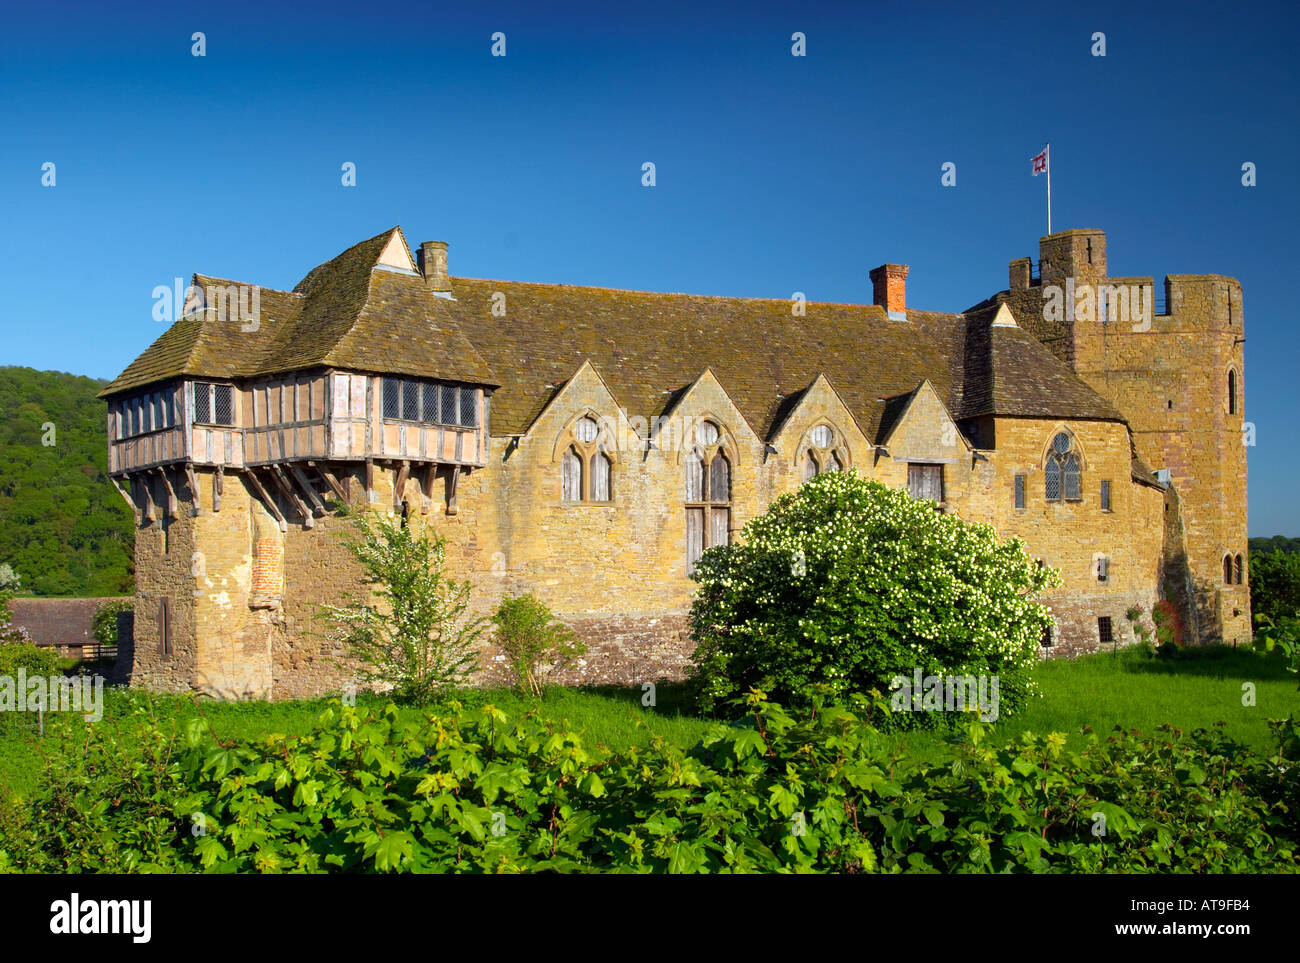 Stokesay Castle Shropshire England 13th century fortified manor house Now owned by English Heritage  Stock Photo